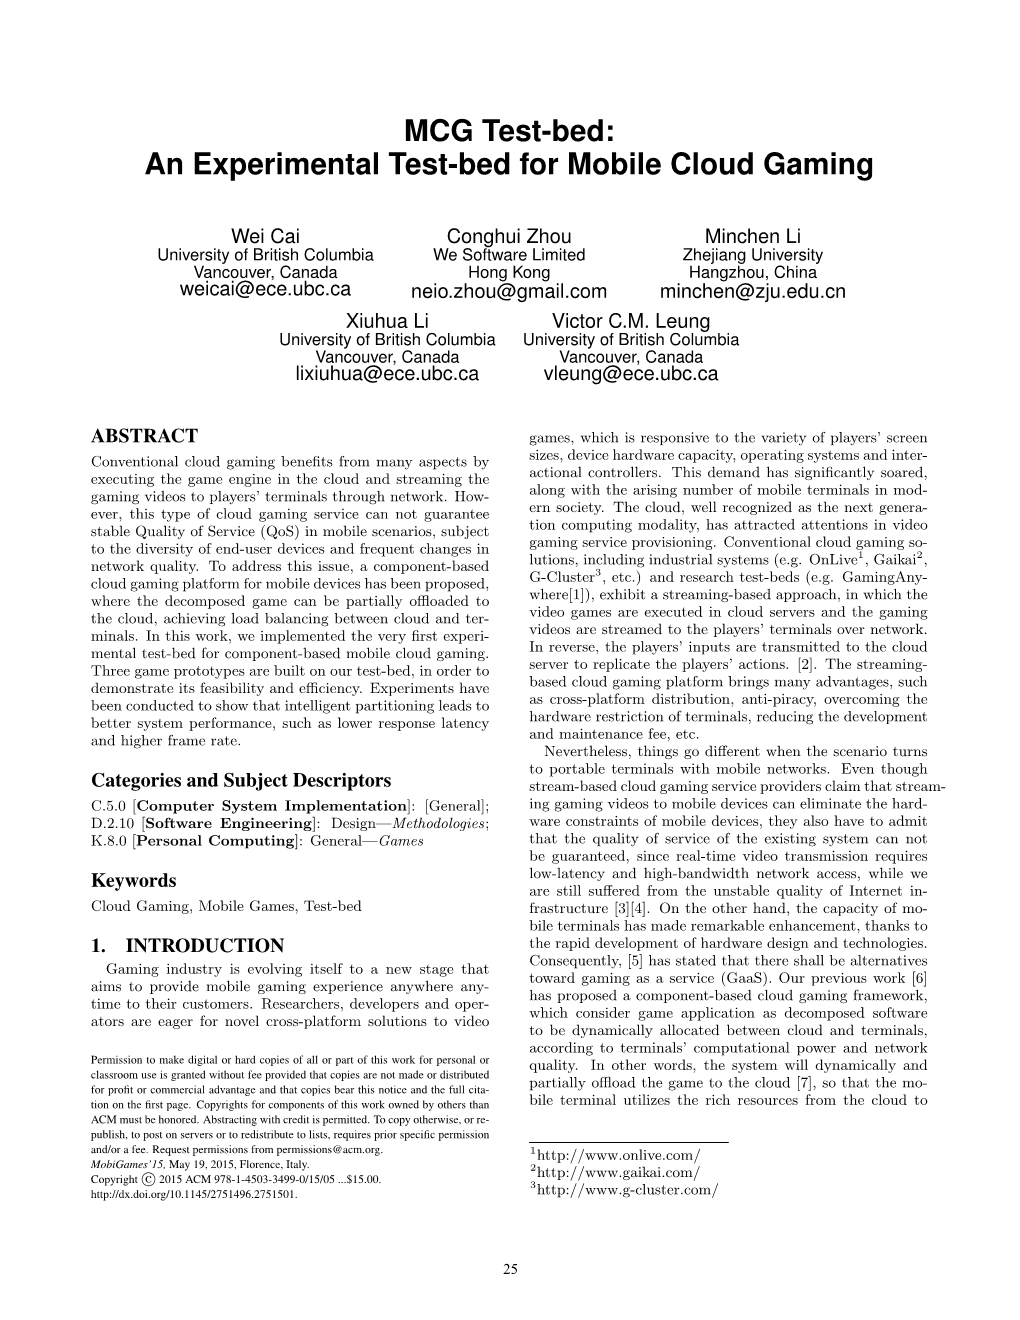 MCG Test-Bed: an Experimental Test-Bed for Mobile Cloud Gaming